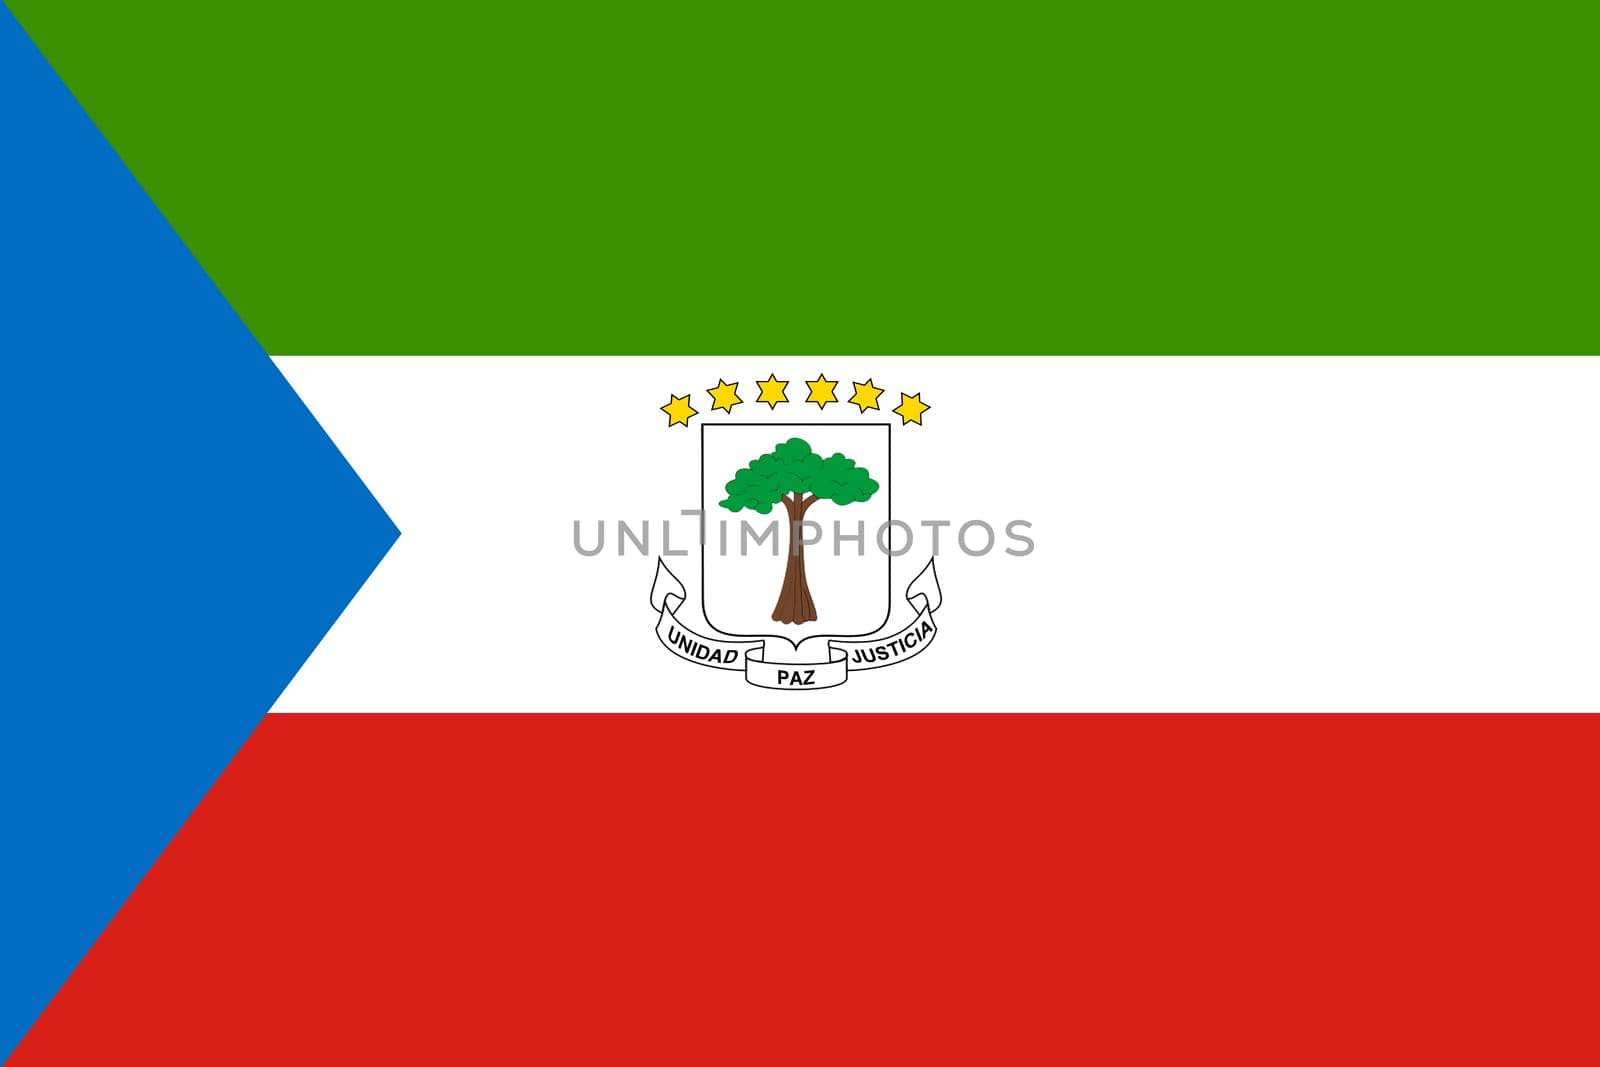 An Equatorial Guinea flag background illustration blue green white red yellow stars tree